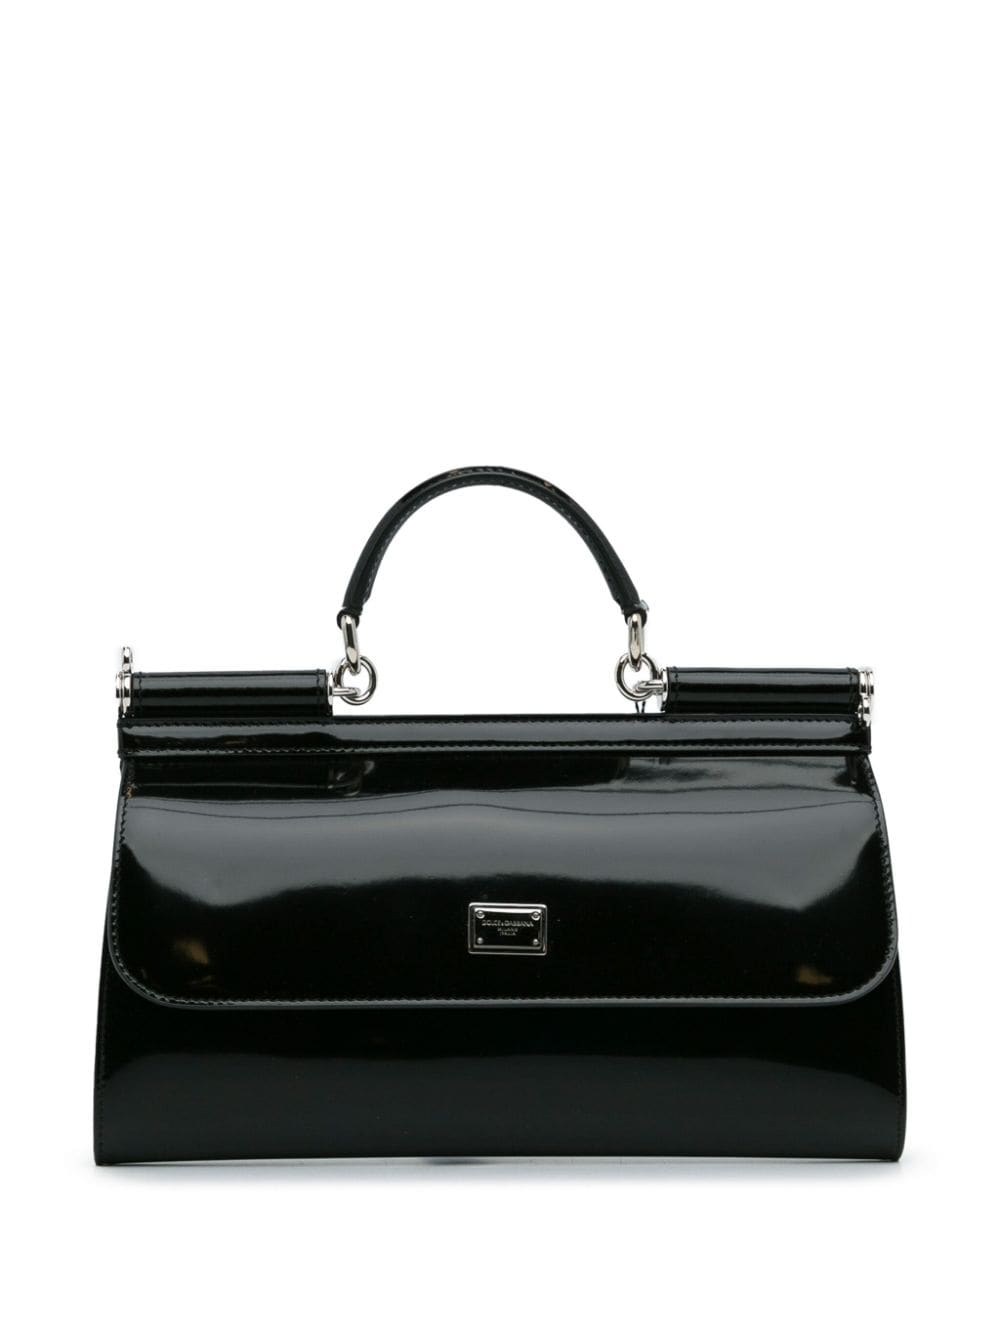 Pre-owned Dolce & Gabbana 2000-2022 Miss Sicily Patent Leather Satchel Bag In Black